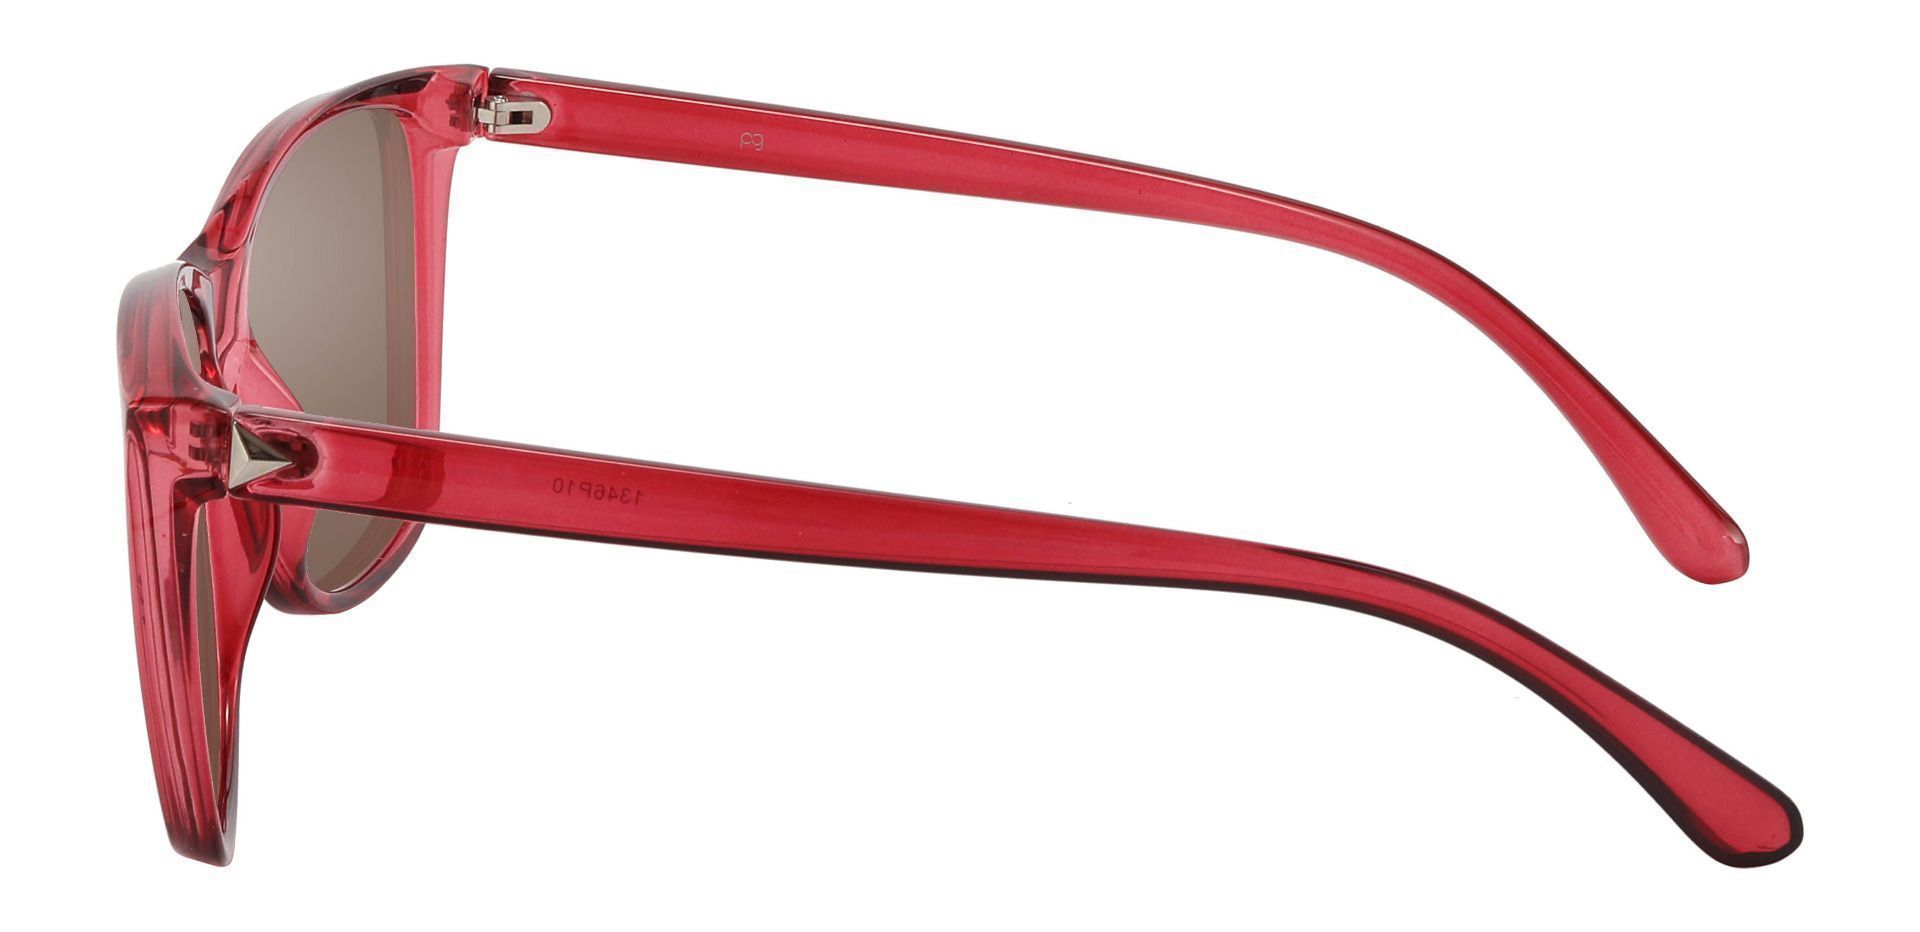 Taryn Square Prescription Sunglasses - Red Frame With Brown Lenses